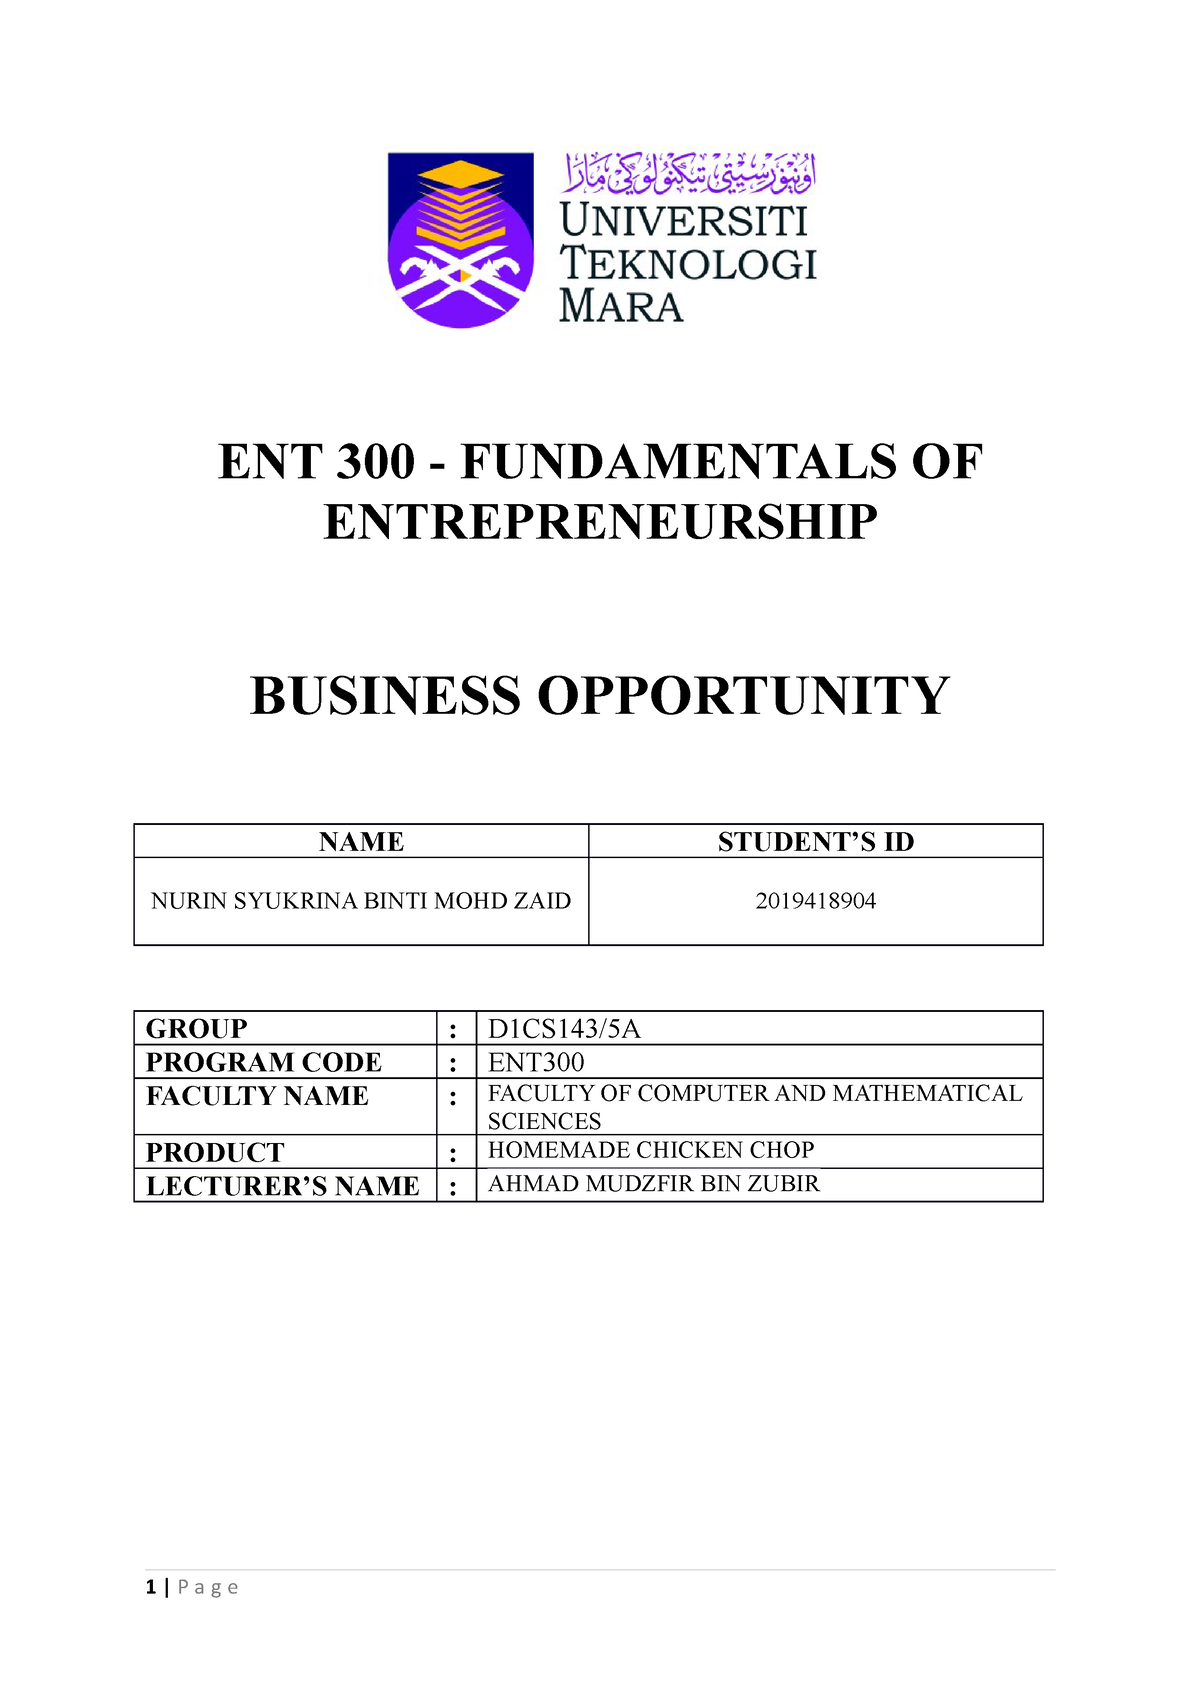 ent300 individual assignment service